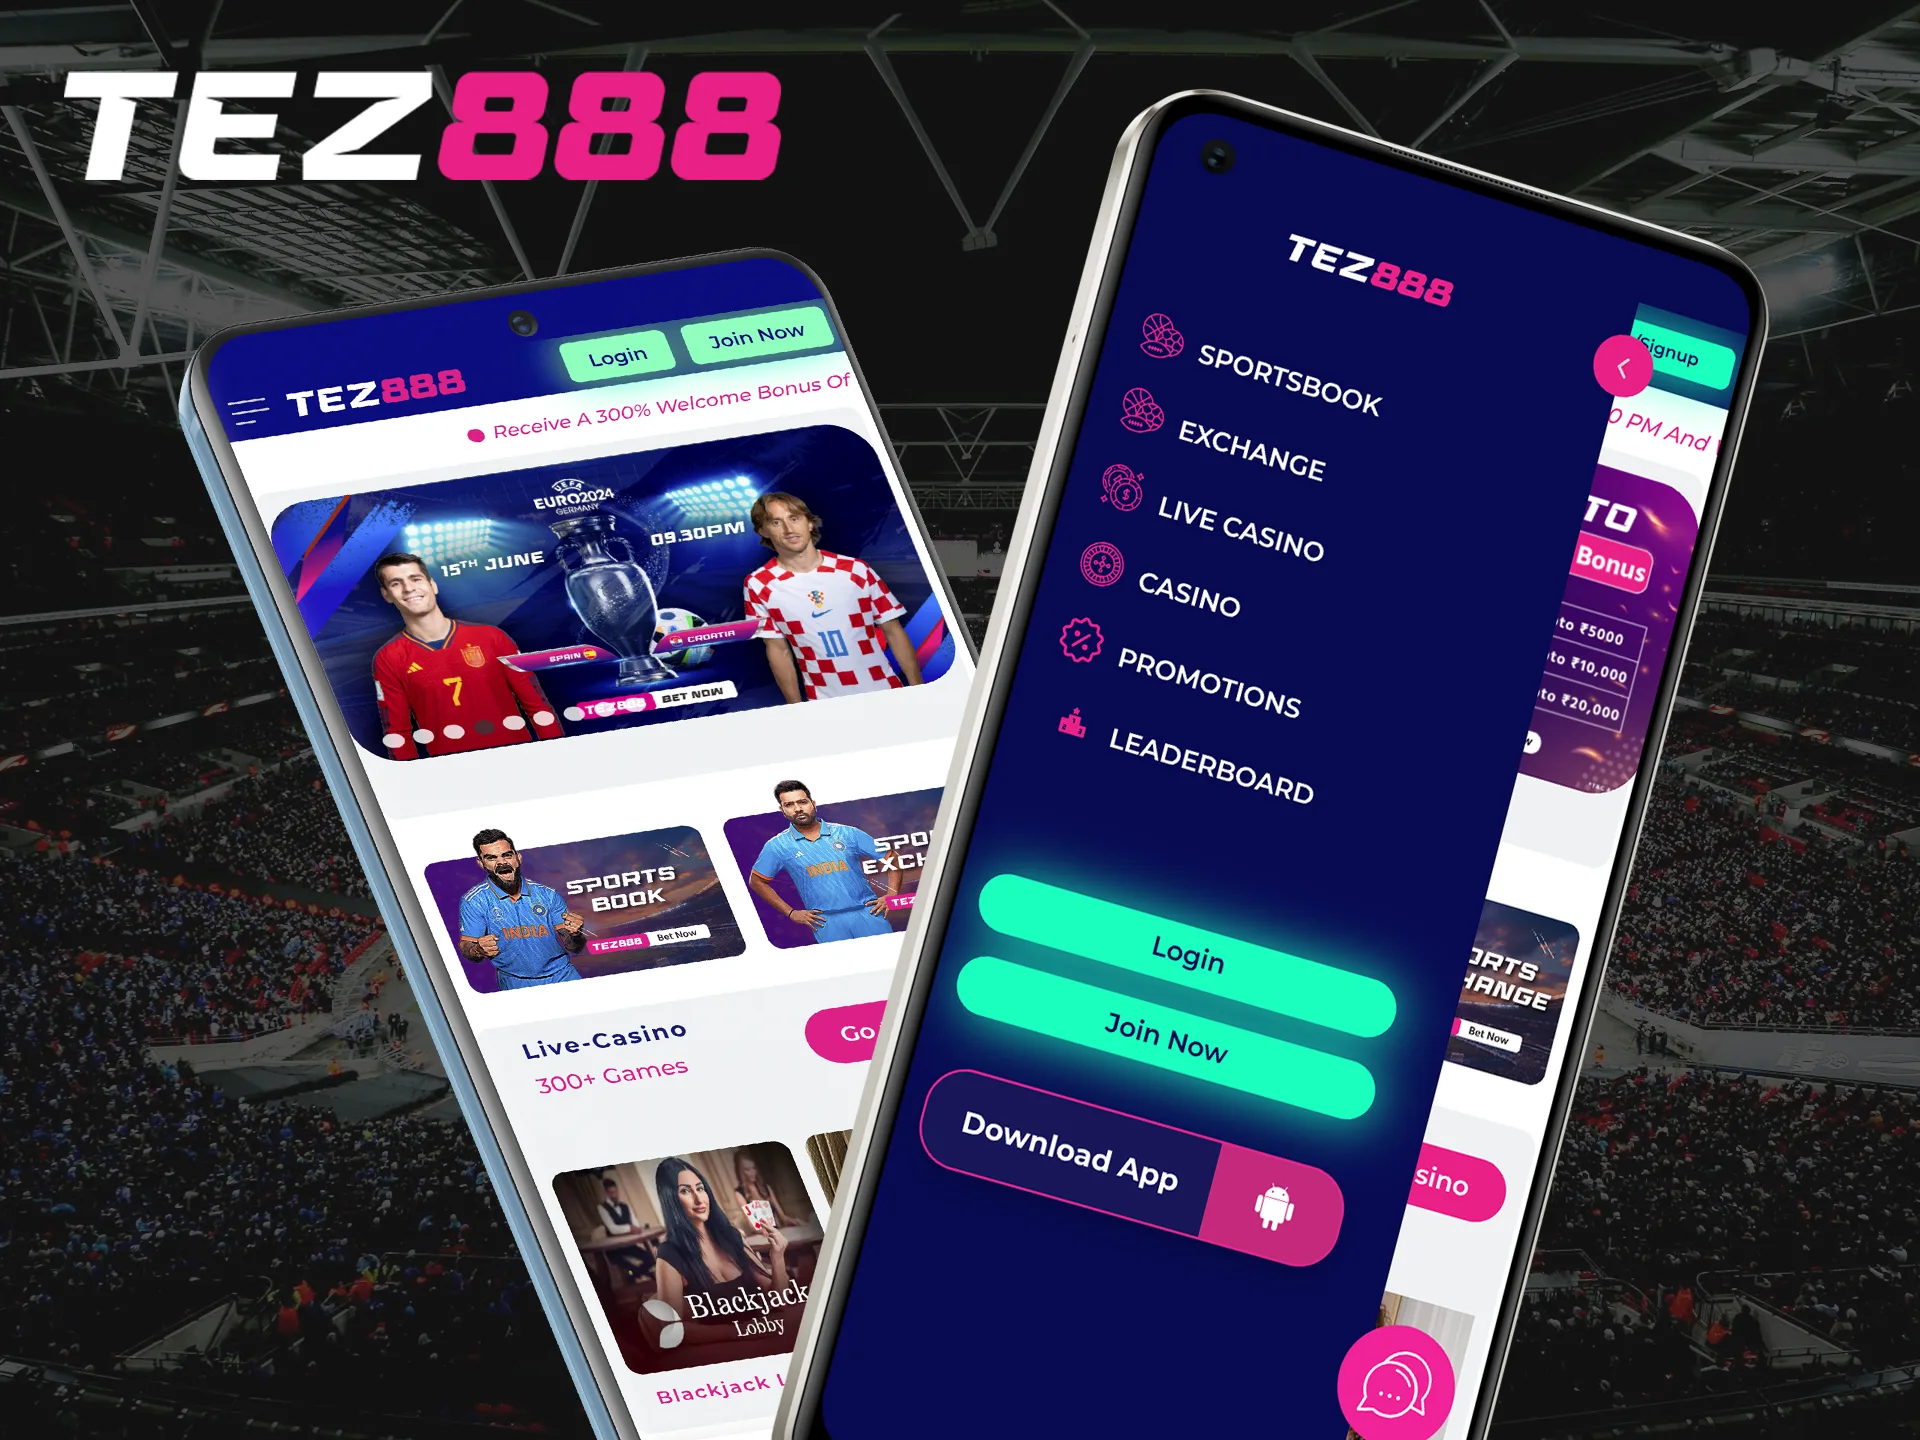 Install the Tez888 app, bet on football events and win.